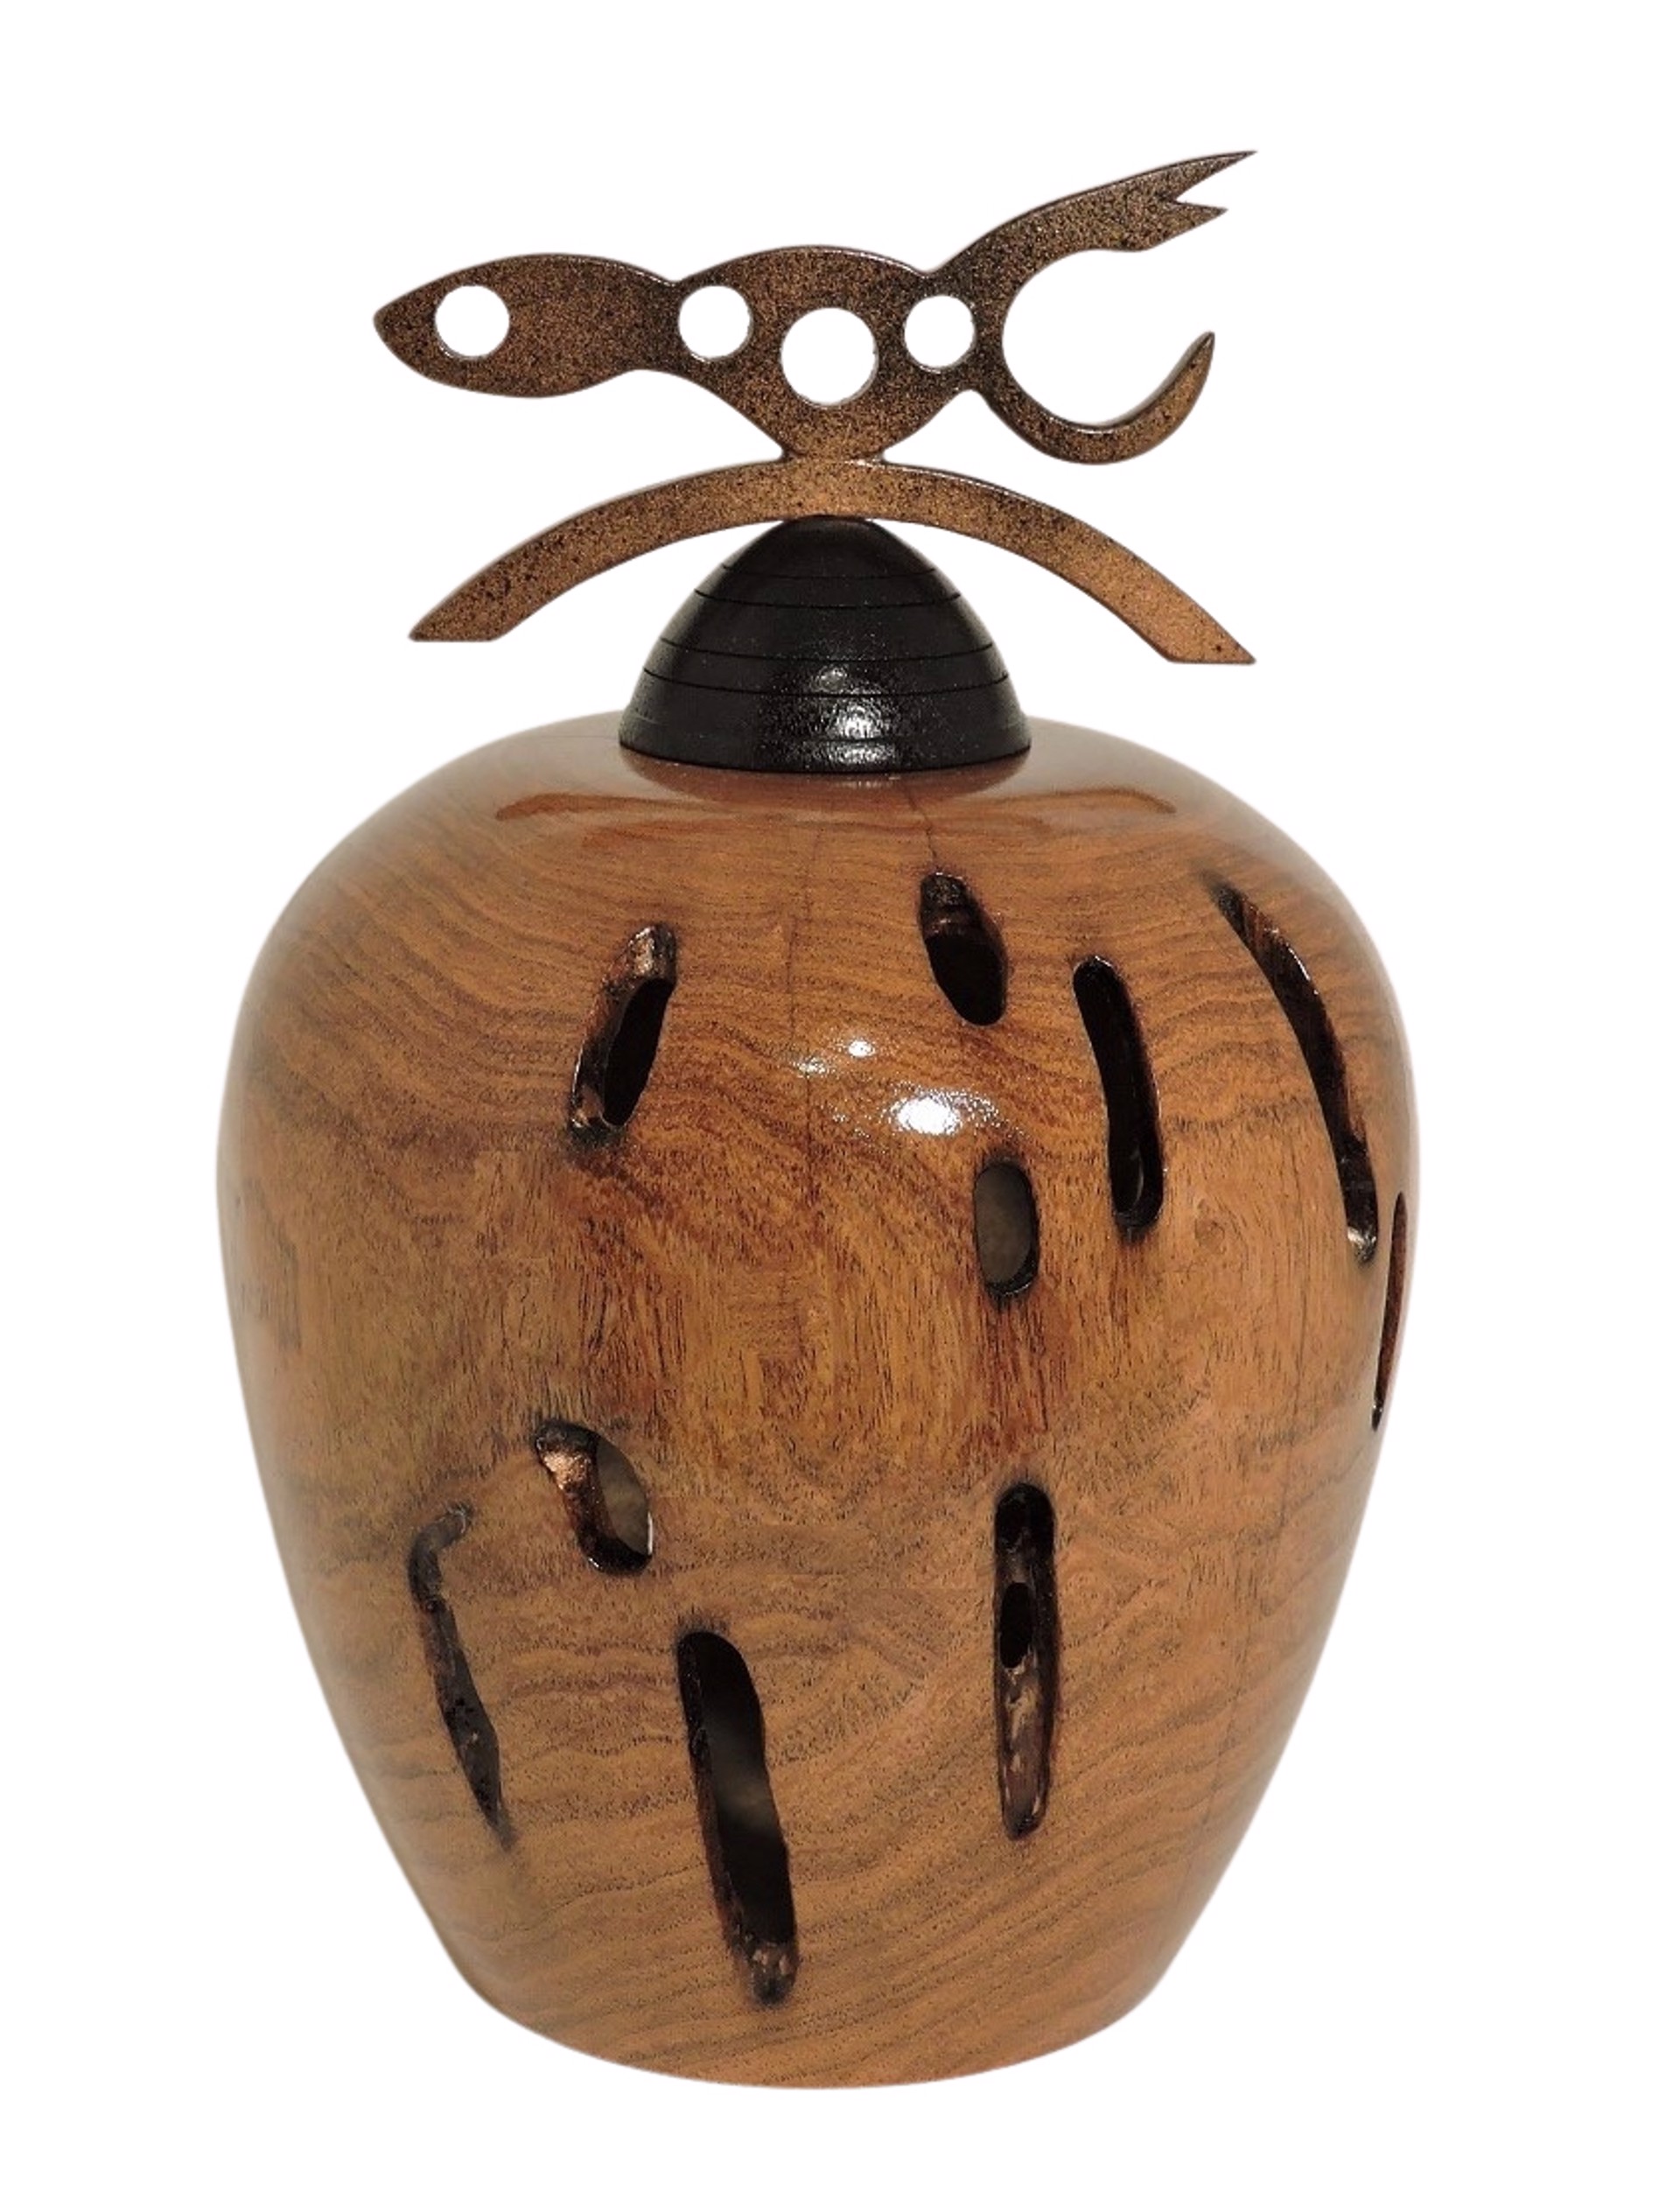 Mesquite with Copper Accents - Hollow Form by Jim Scott